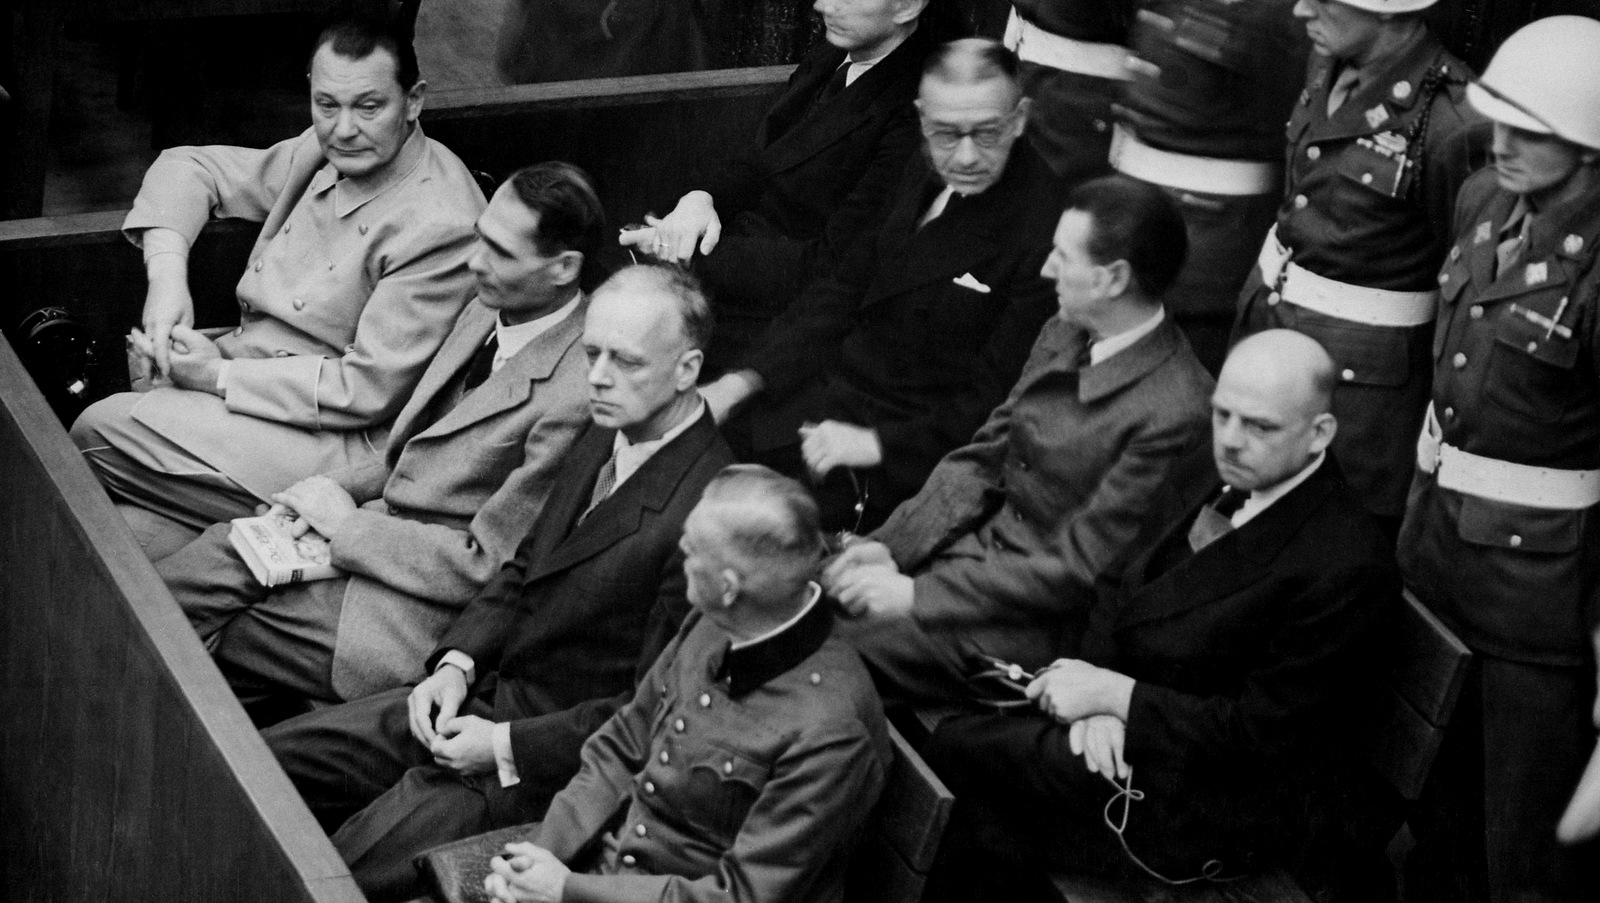 High-ranking Nazi officers stand trial at Nuremberg.